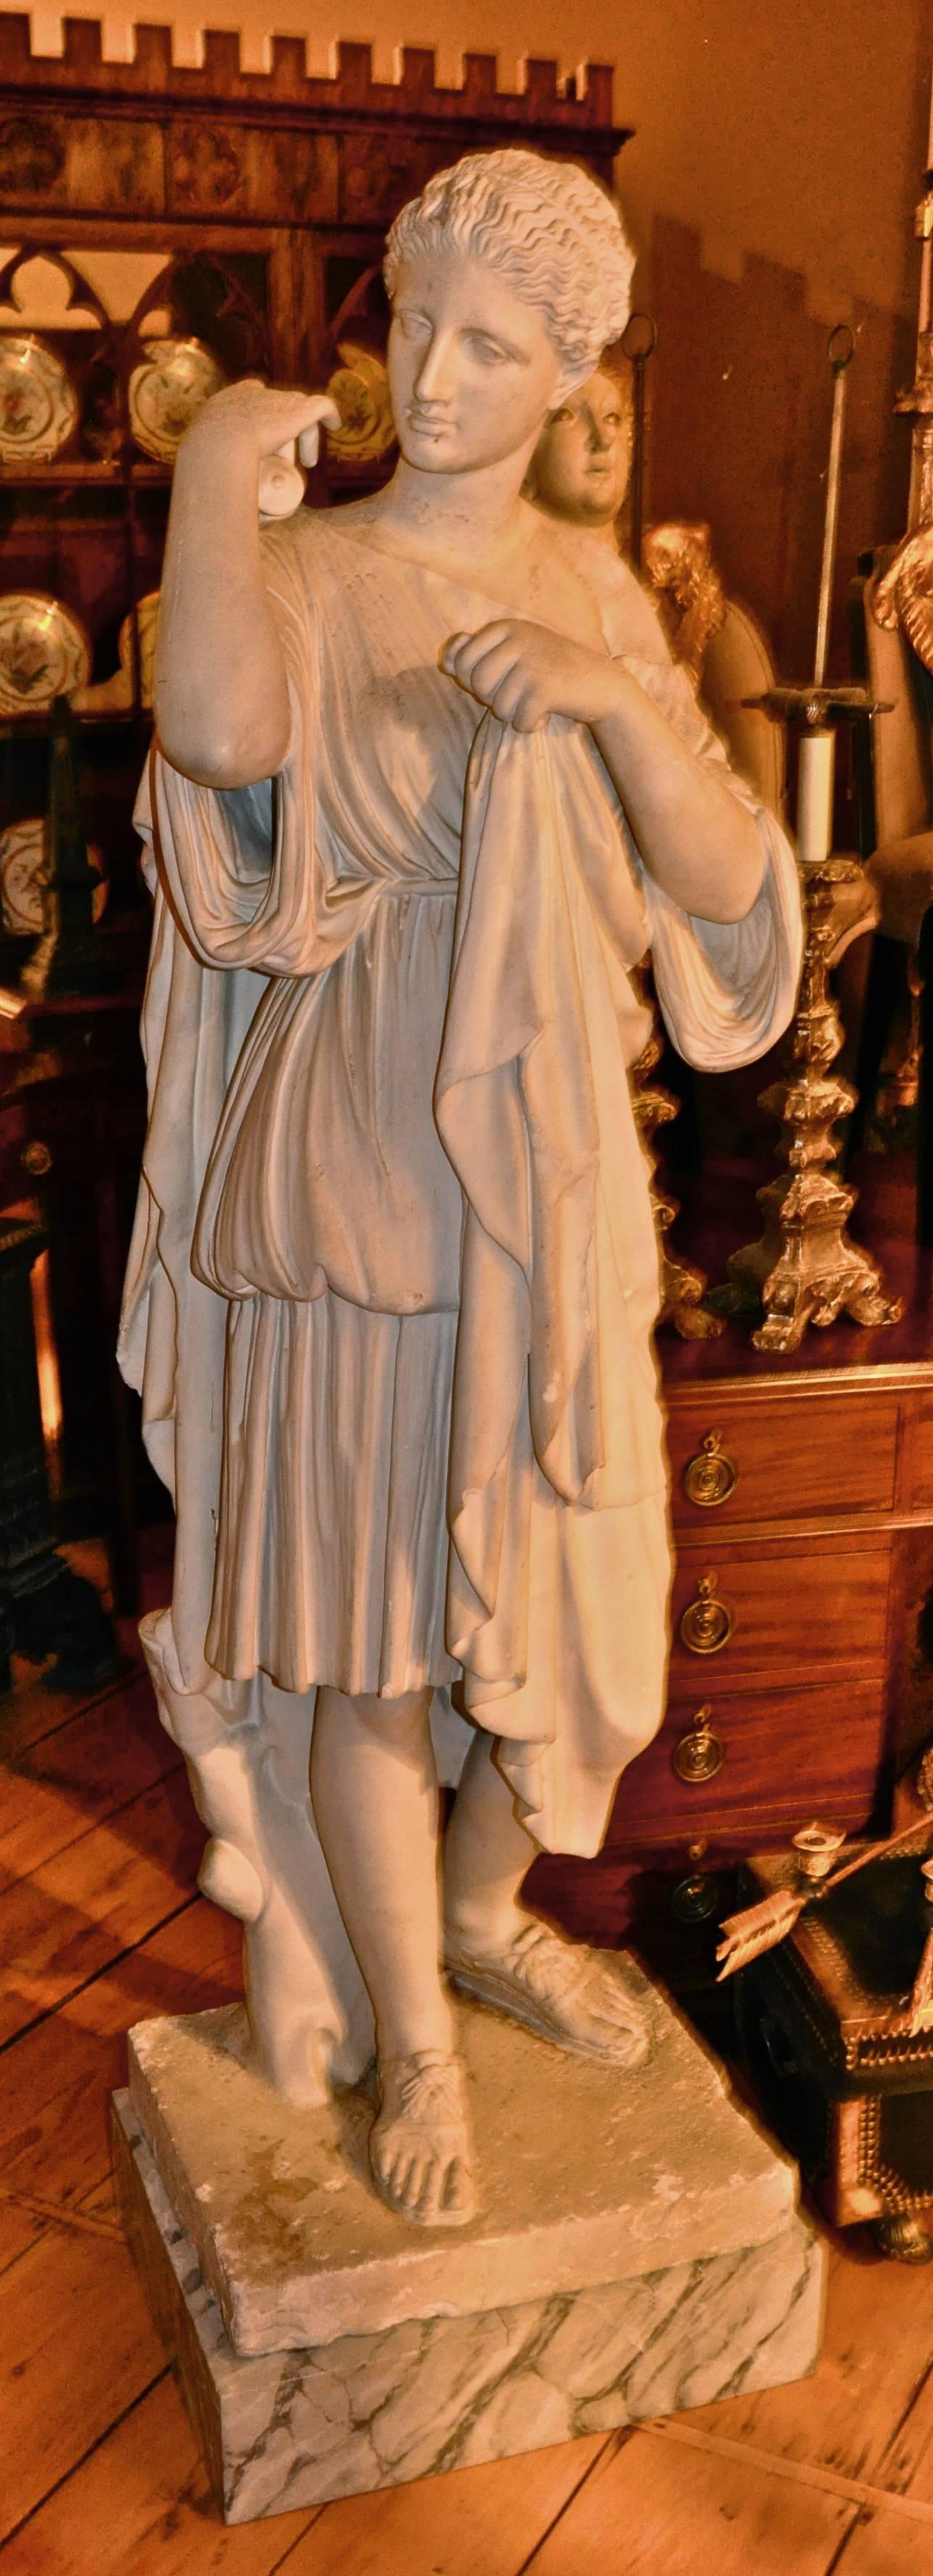 Late 19th century period plaster cast of Diane de Gabies.

Beautifully rendered lifesize cast.
Caproni Brothers, Boston.

The original statue from which this cast was copied was discovered in 1792 by Gavin Hamilton on the property of the Prince